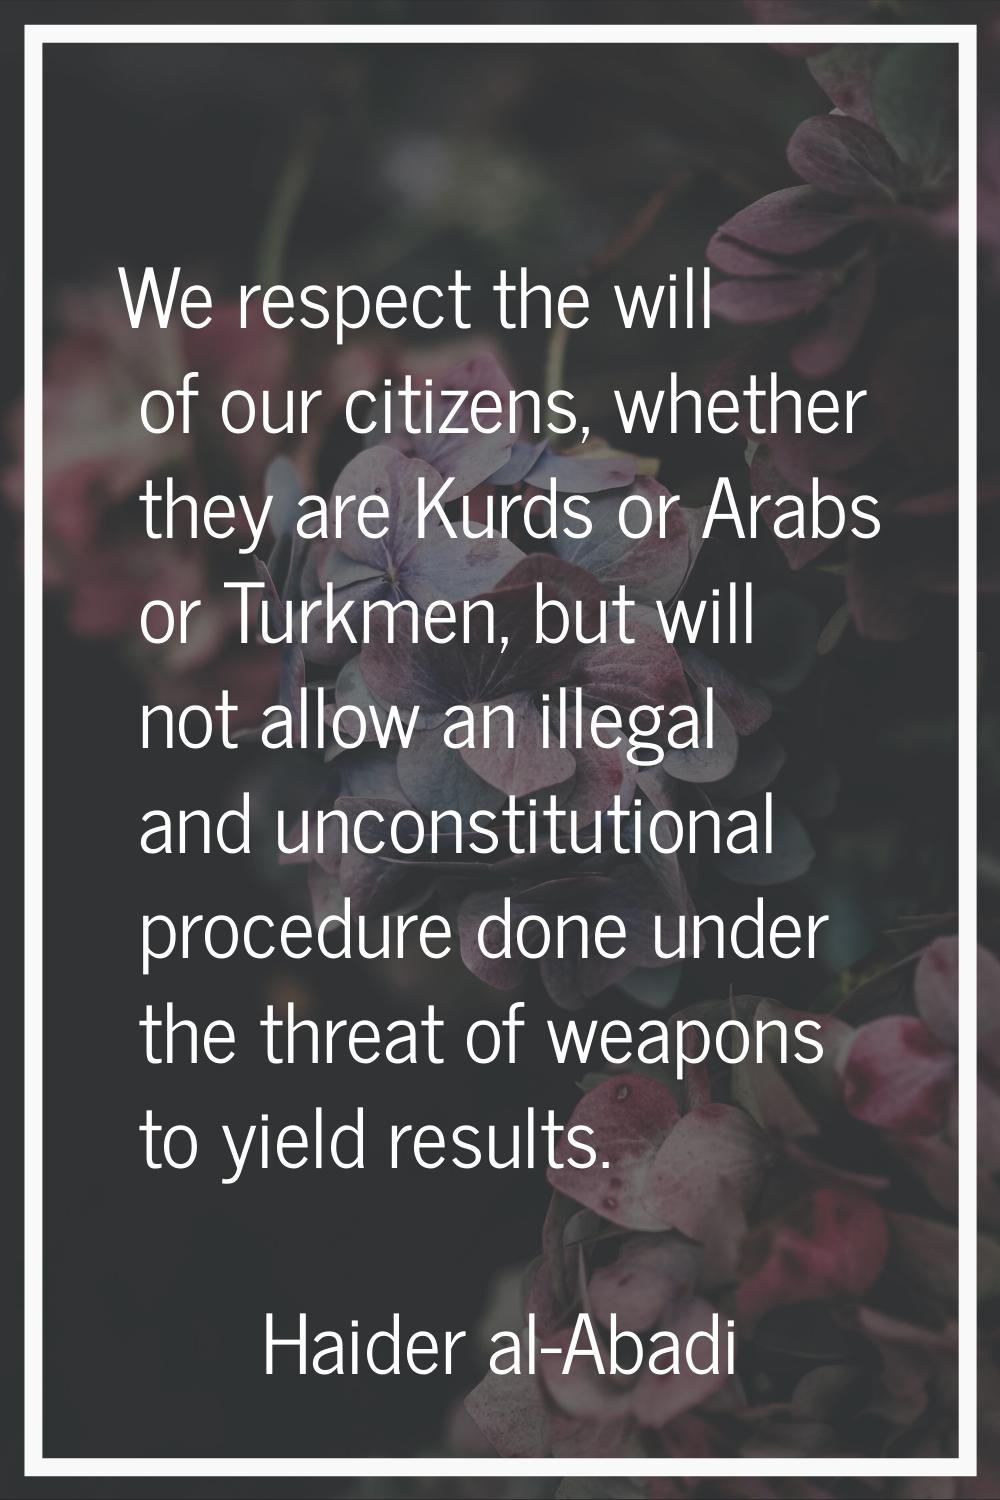 We respect the will of our citizens, whether they are Kurds or Arabs or Turkmen, but will not allow